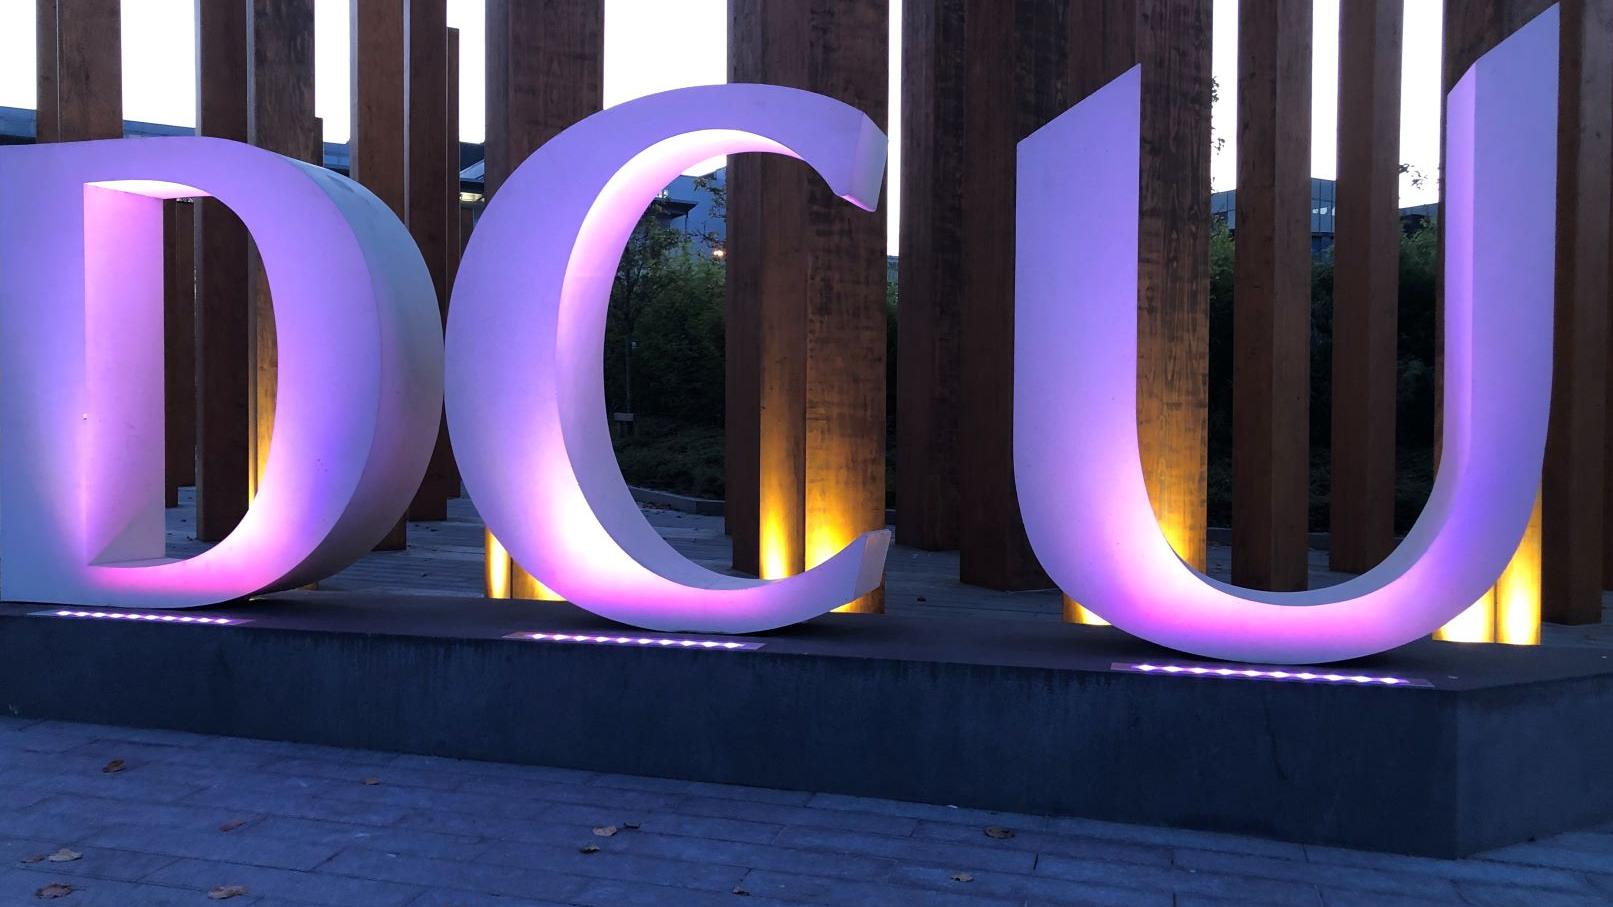 A DCU sign lit by purple lights. 70 buildings and landmarks across Ireland turned purple for Intersex Solidarity Day on 8 November 2020.